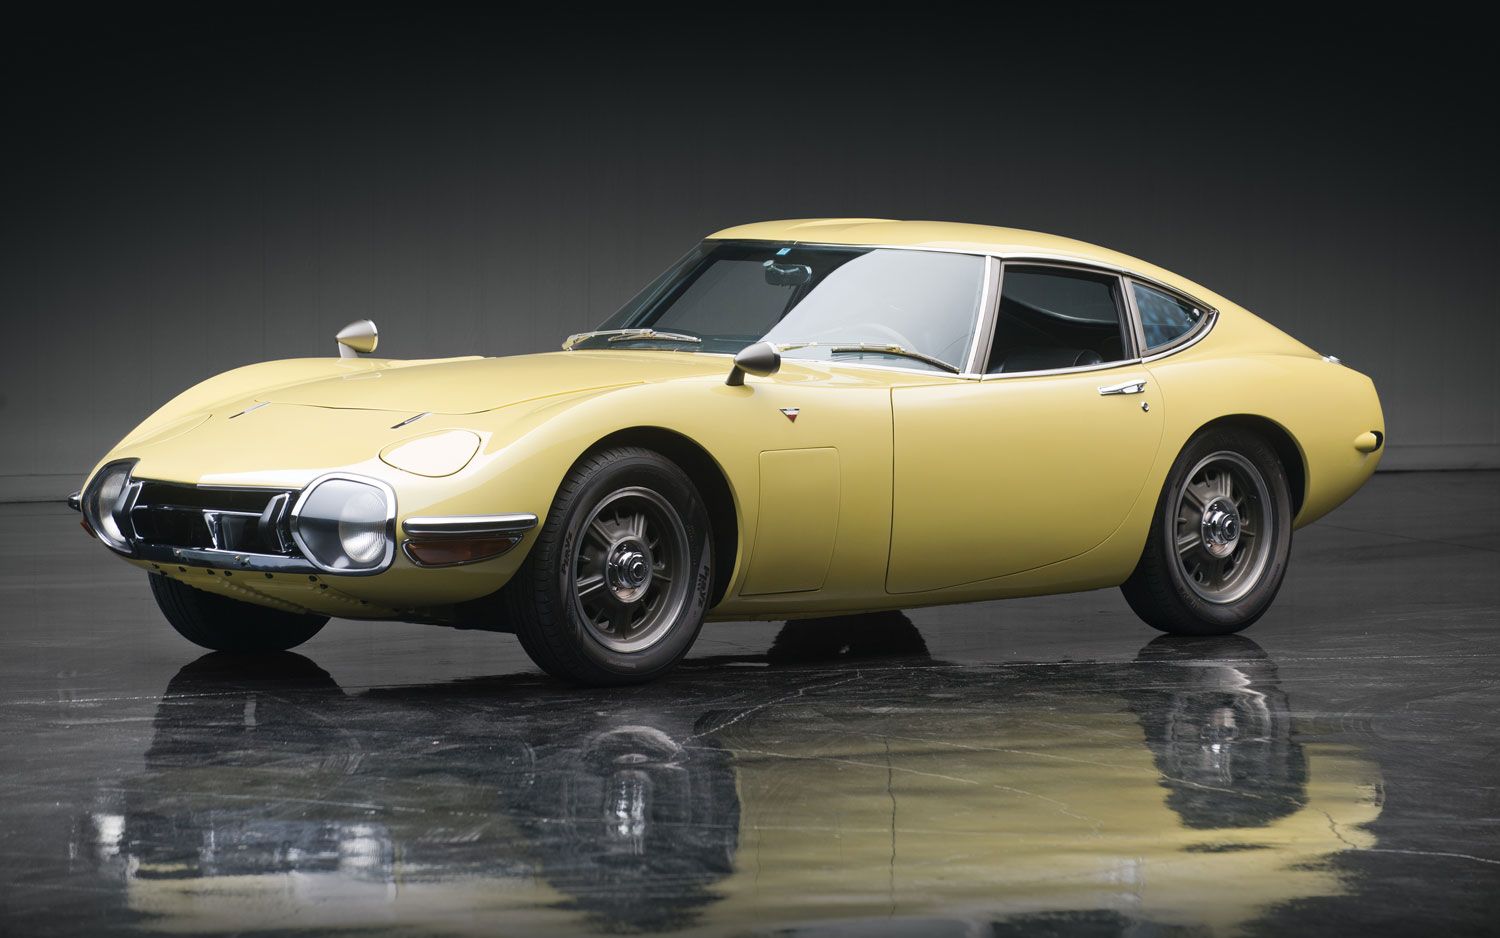 Toyota 2000 GT parked